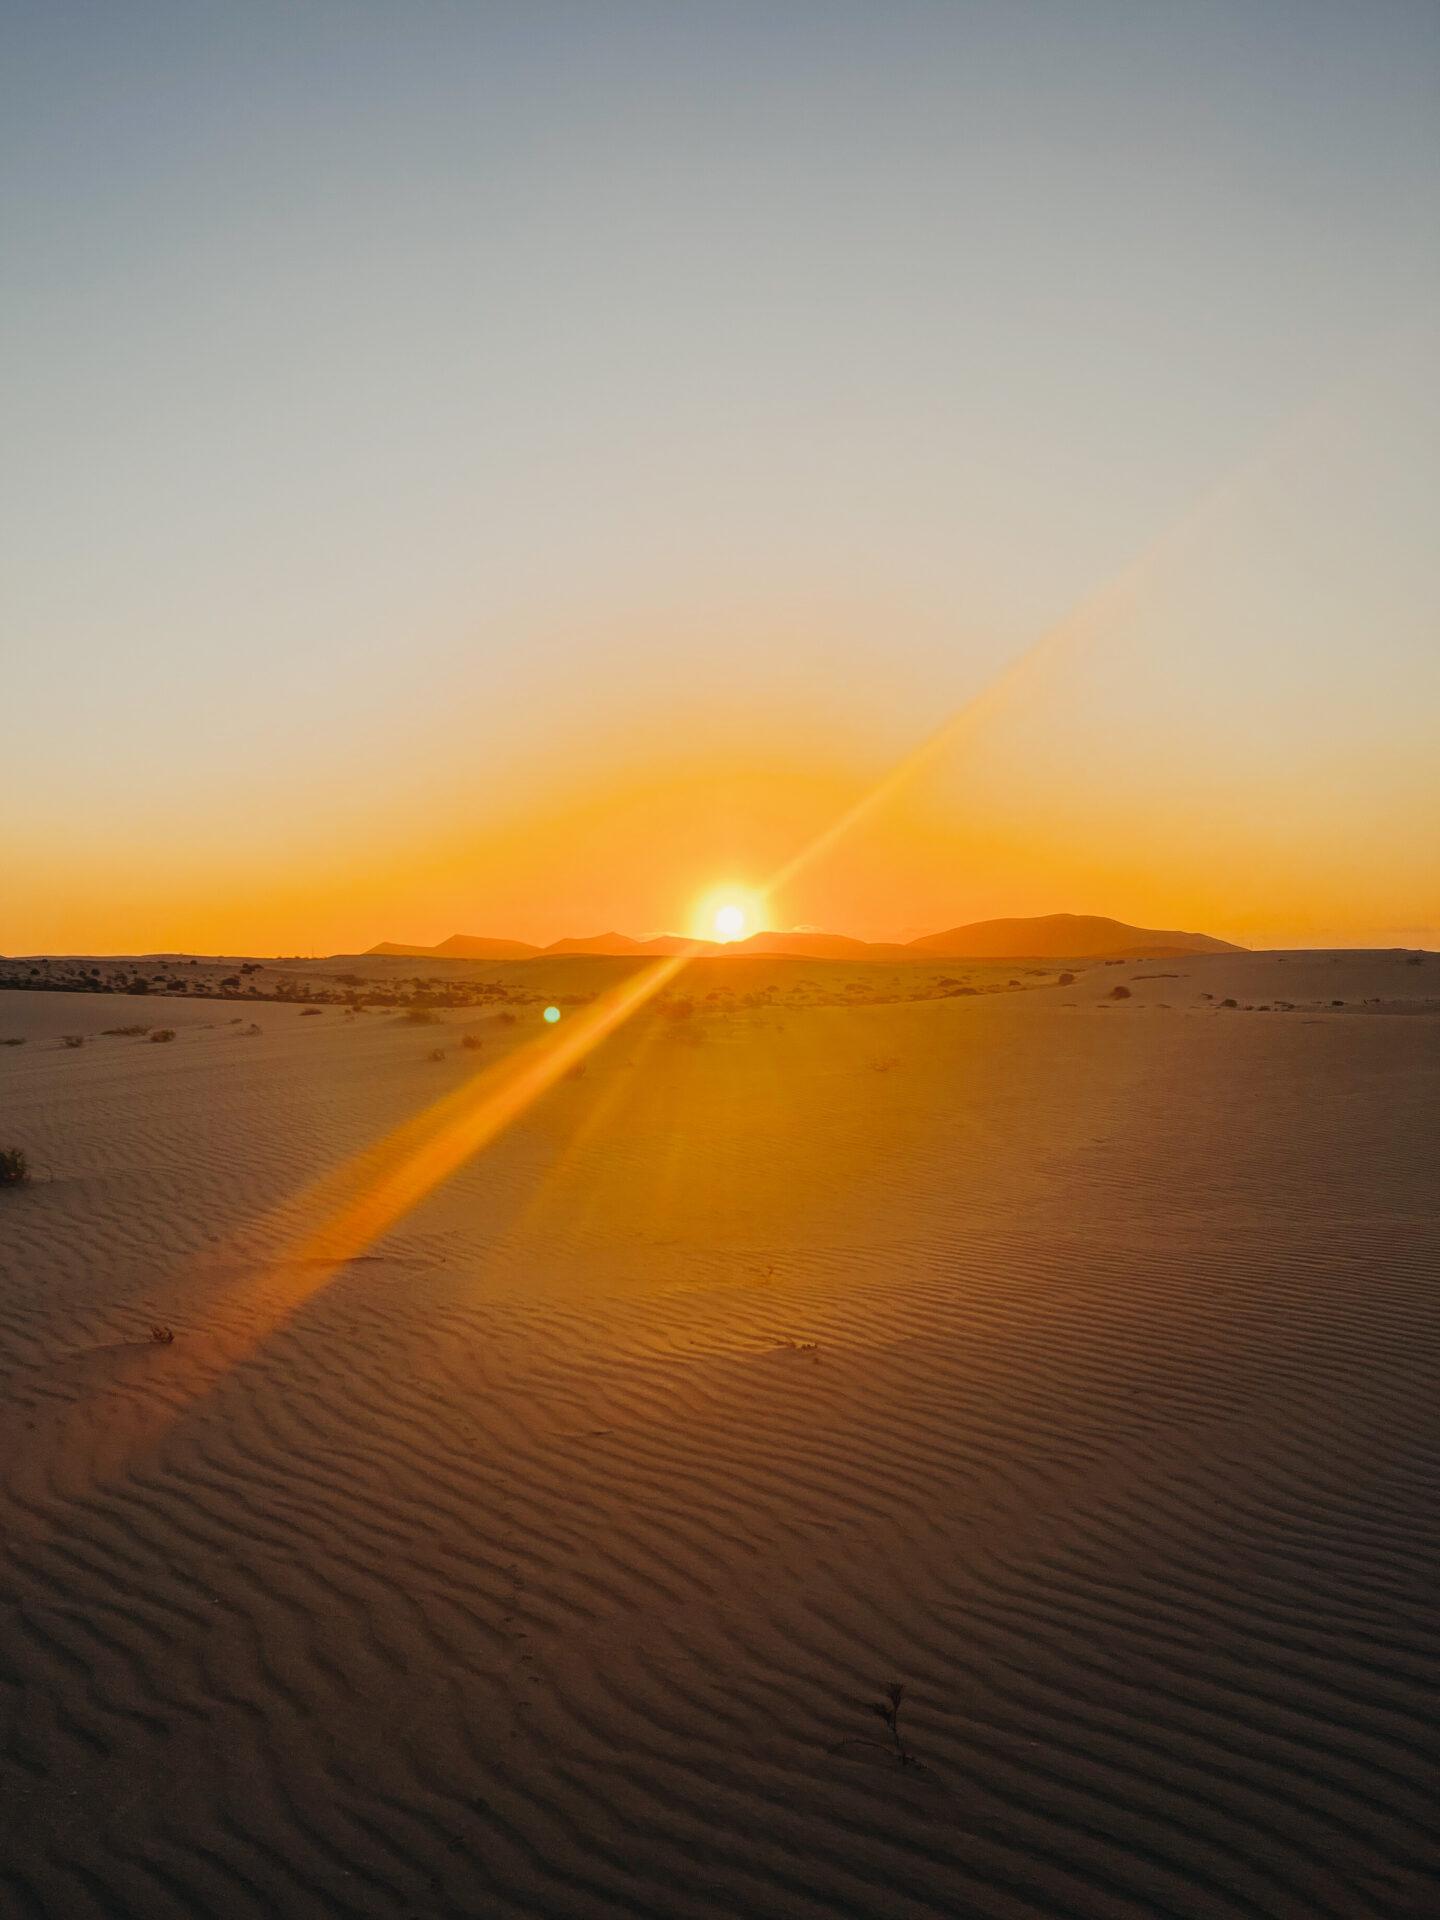 Sunset on the Dunas de Corralejo, by Dancing the Earth